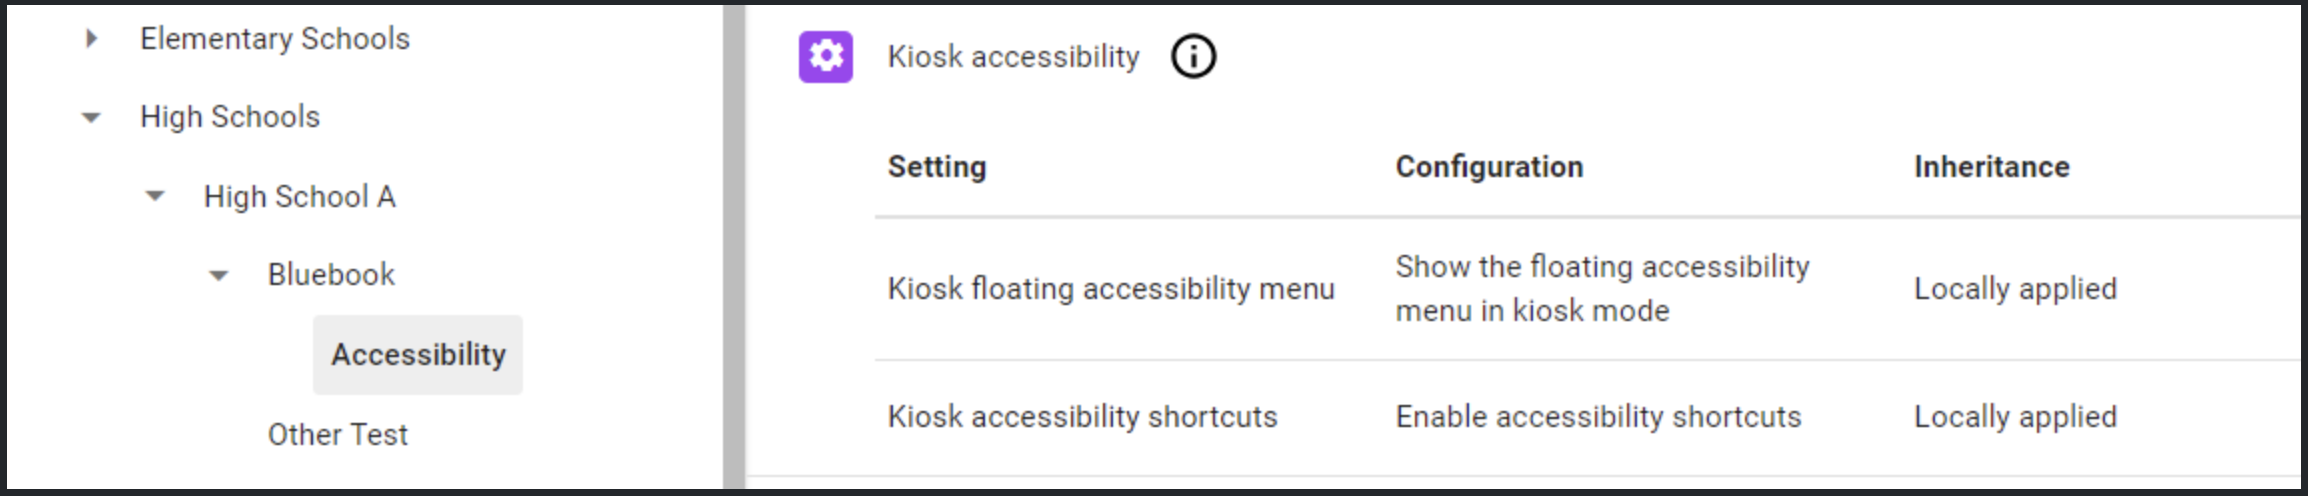 Figure 2 is a screenshot showing the Google admin console for High School A. The Bluebook organizational unit is expanded to show a child organizational unit called Accessibility. This organizational unit is configured to show the floating accessibility menu and enable accessibility shortcuts.